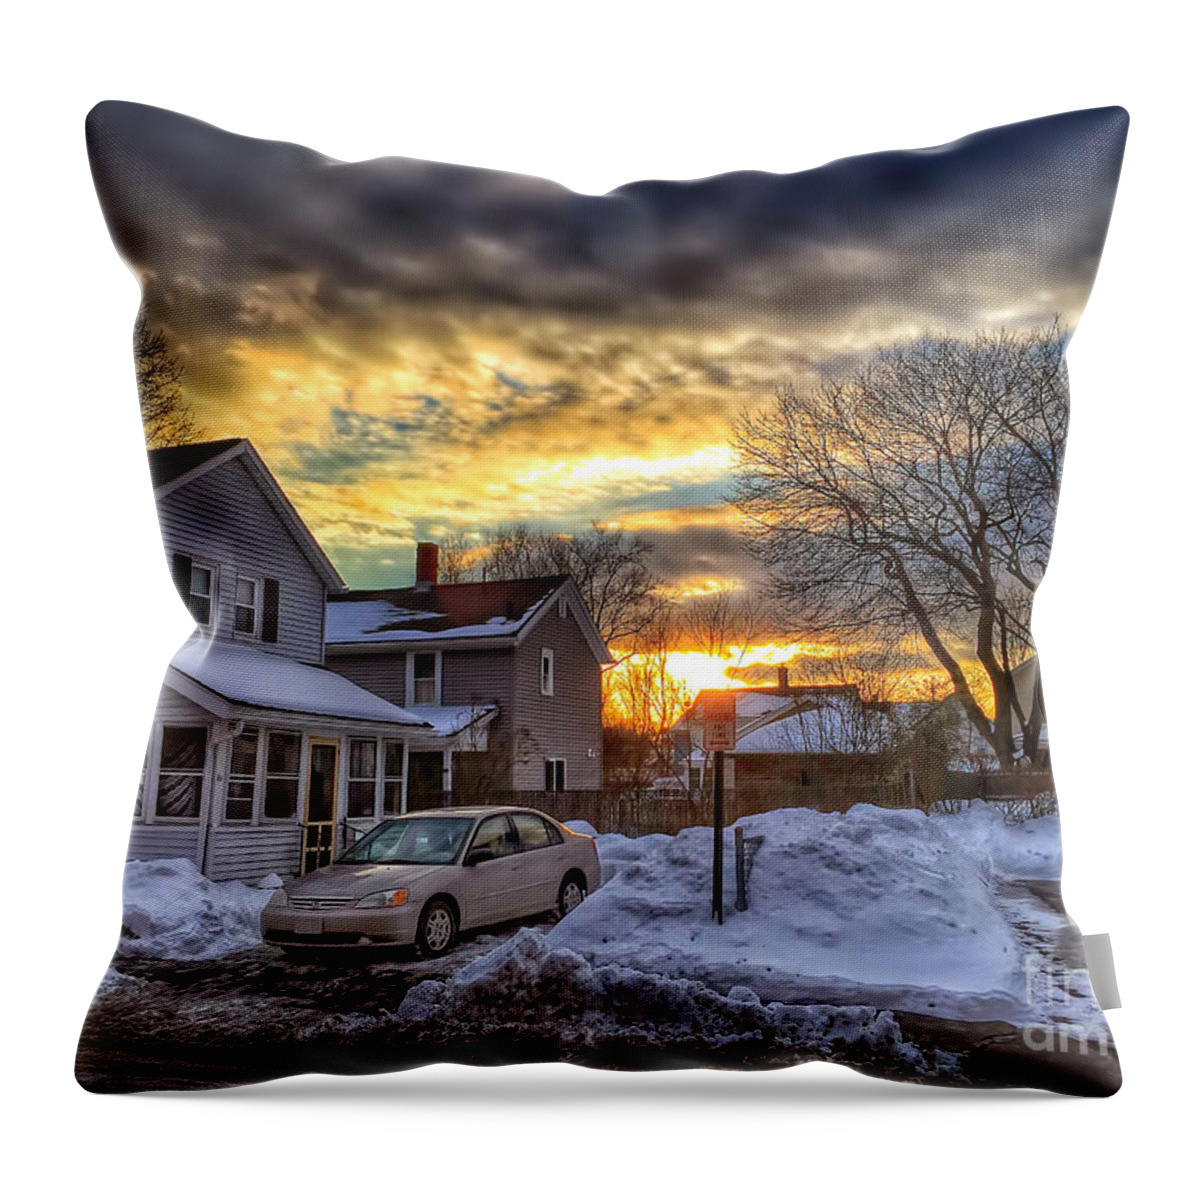 Sunset Throw Pillow featuring the photograph Snowy Sunset by HD Connelly